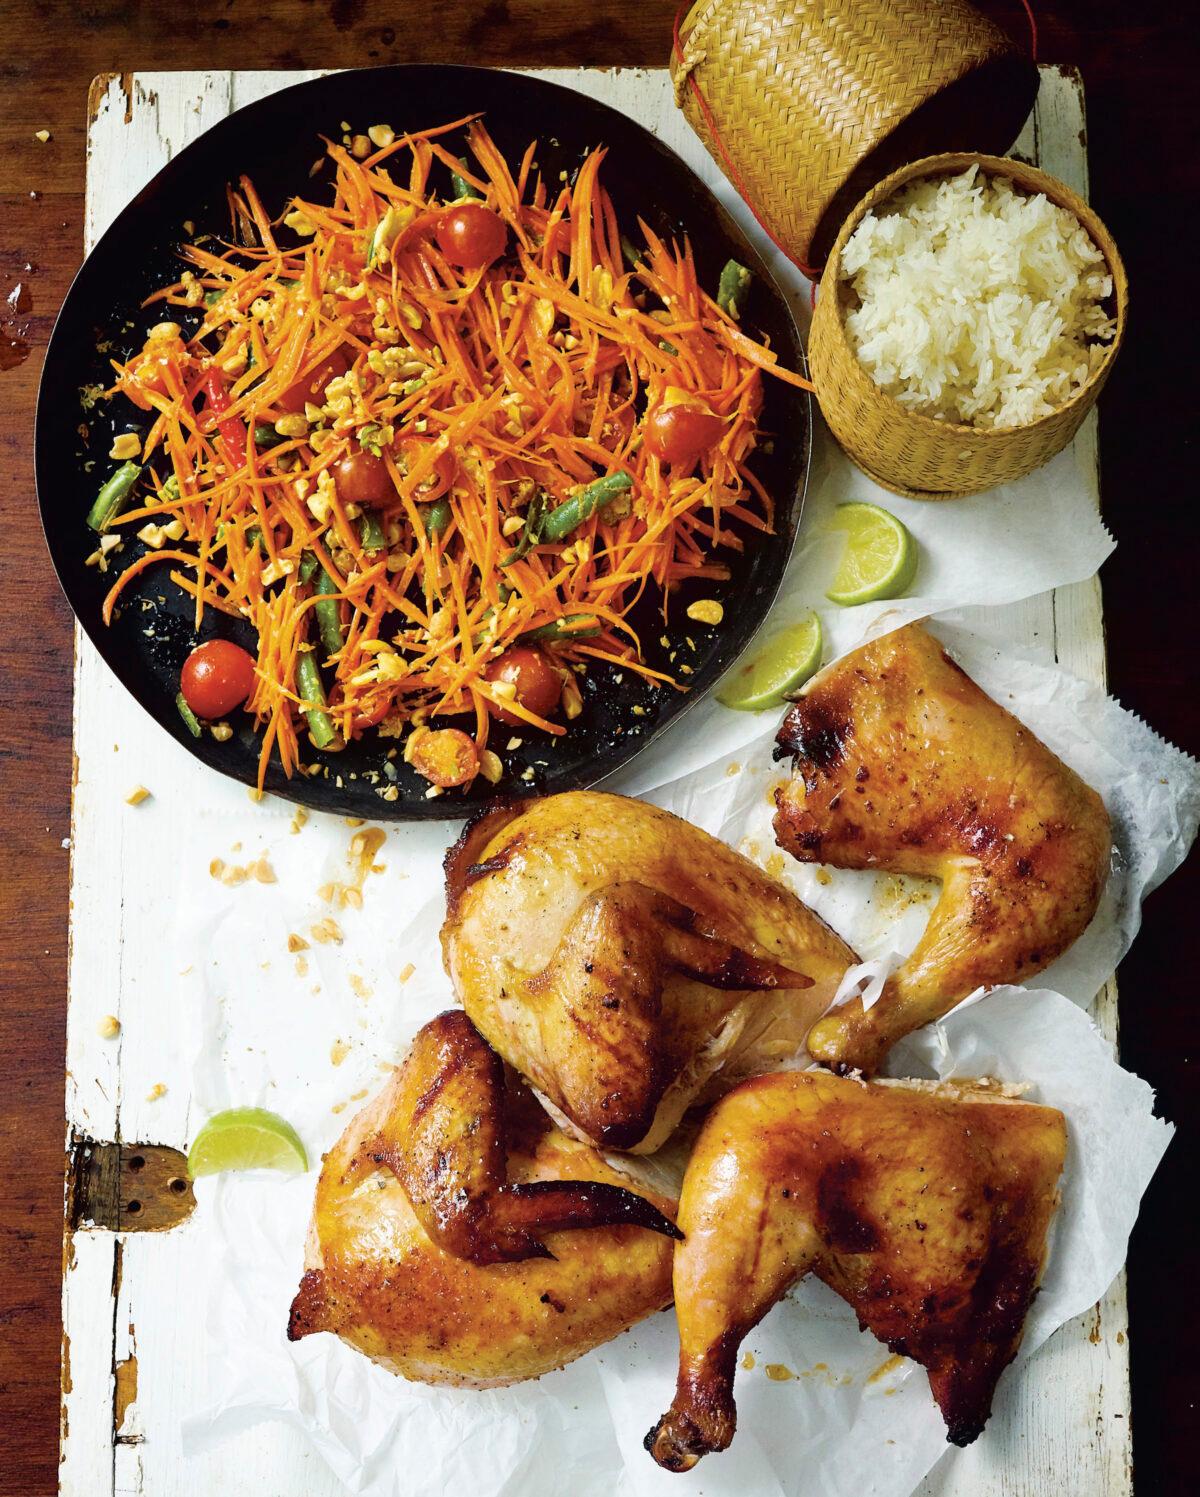 Grilled chicken, spicy salad, and sticky rice, "the so-called trinity of Isan," writes Leela Punyaratabandhu, "that has won hearts and minds the world over." (Photo by David Loftus)